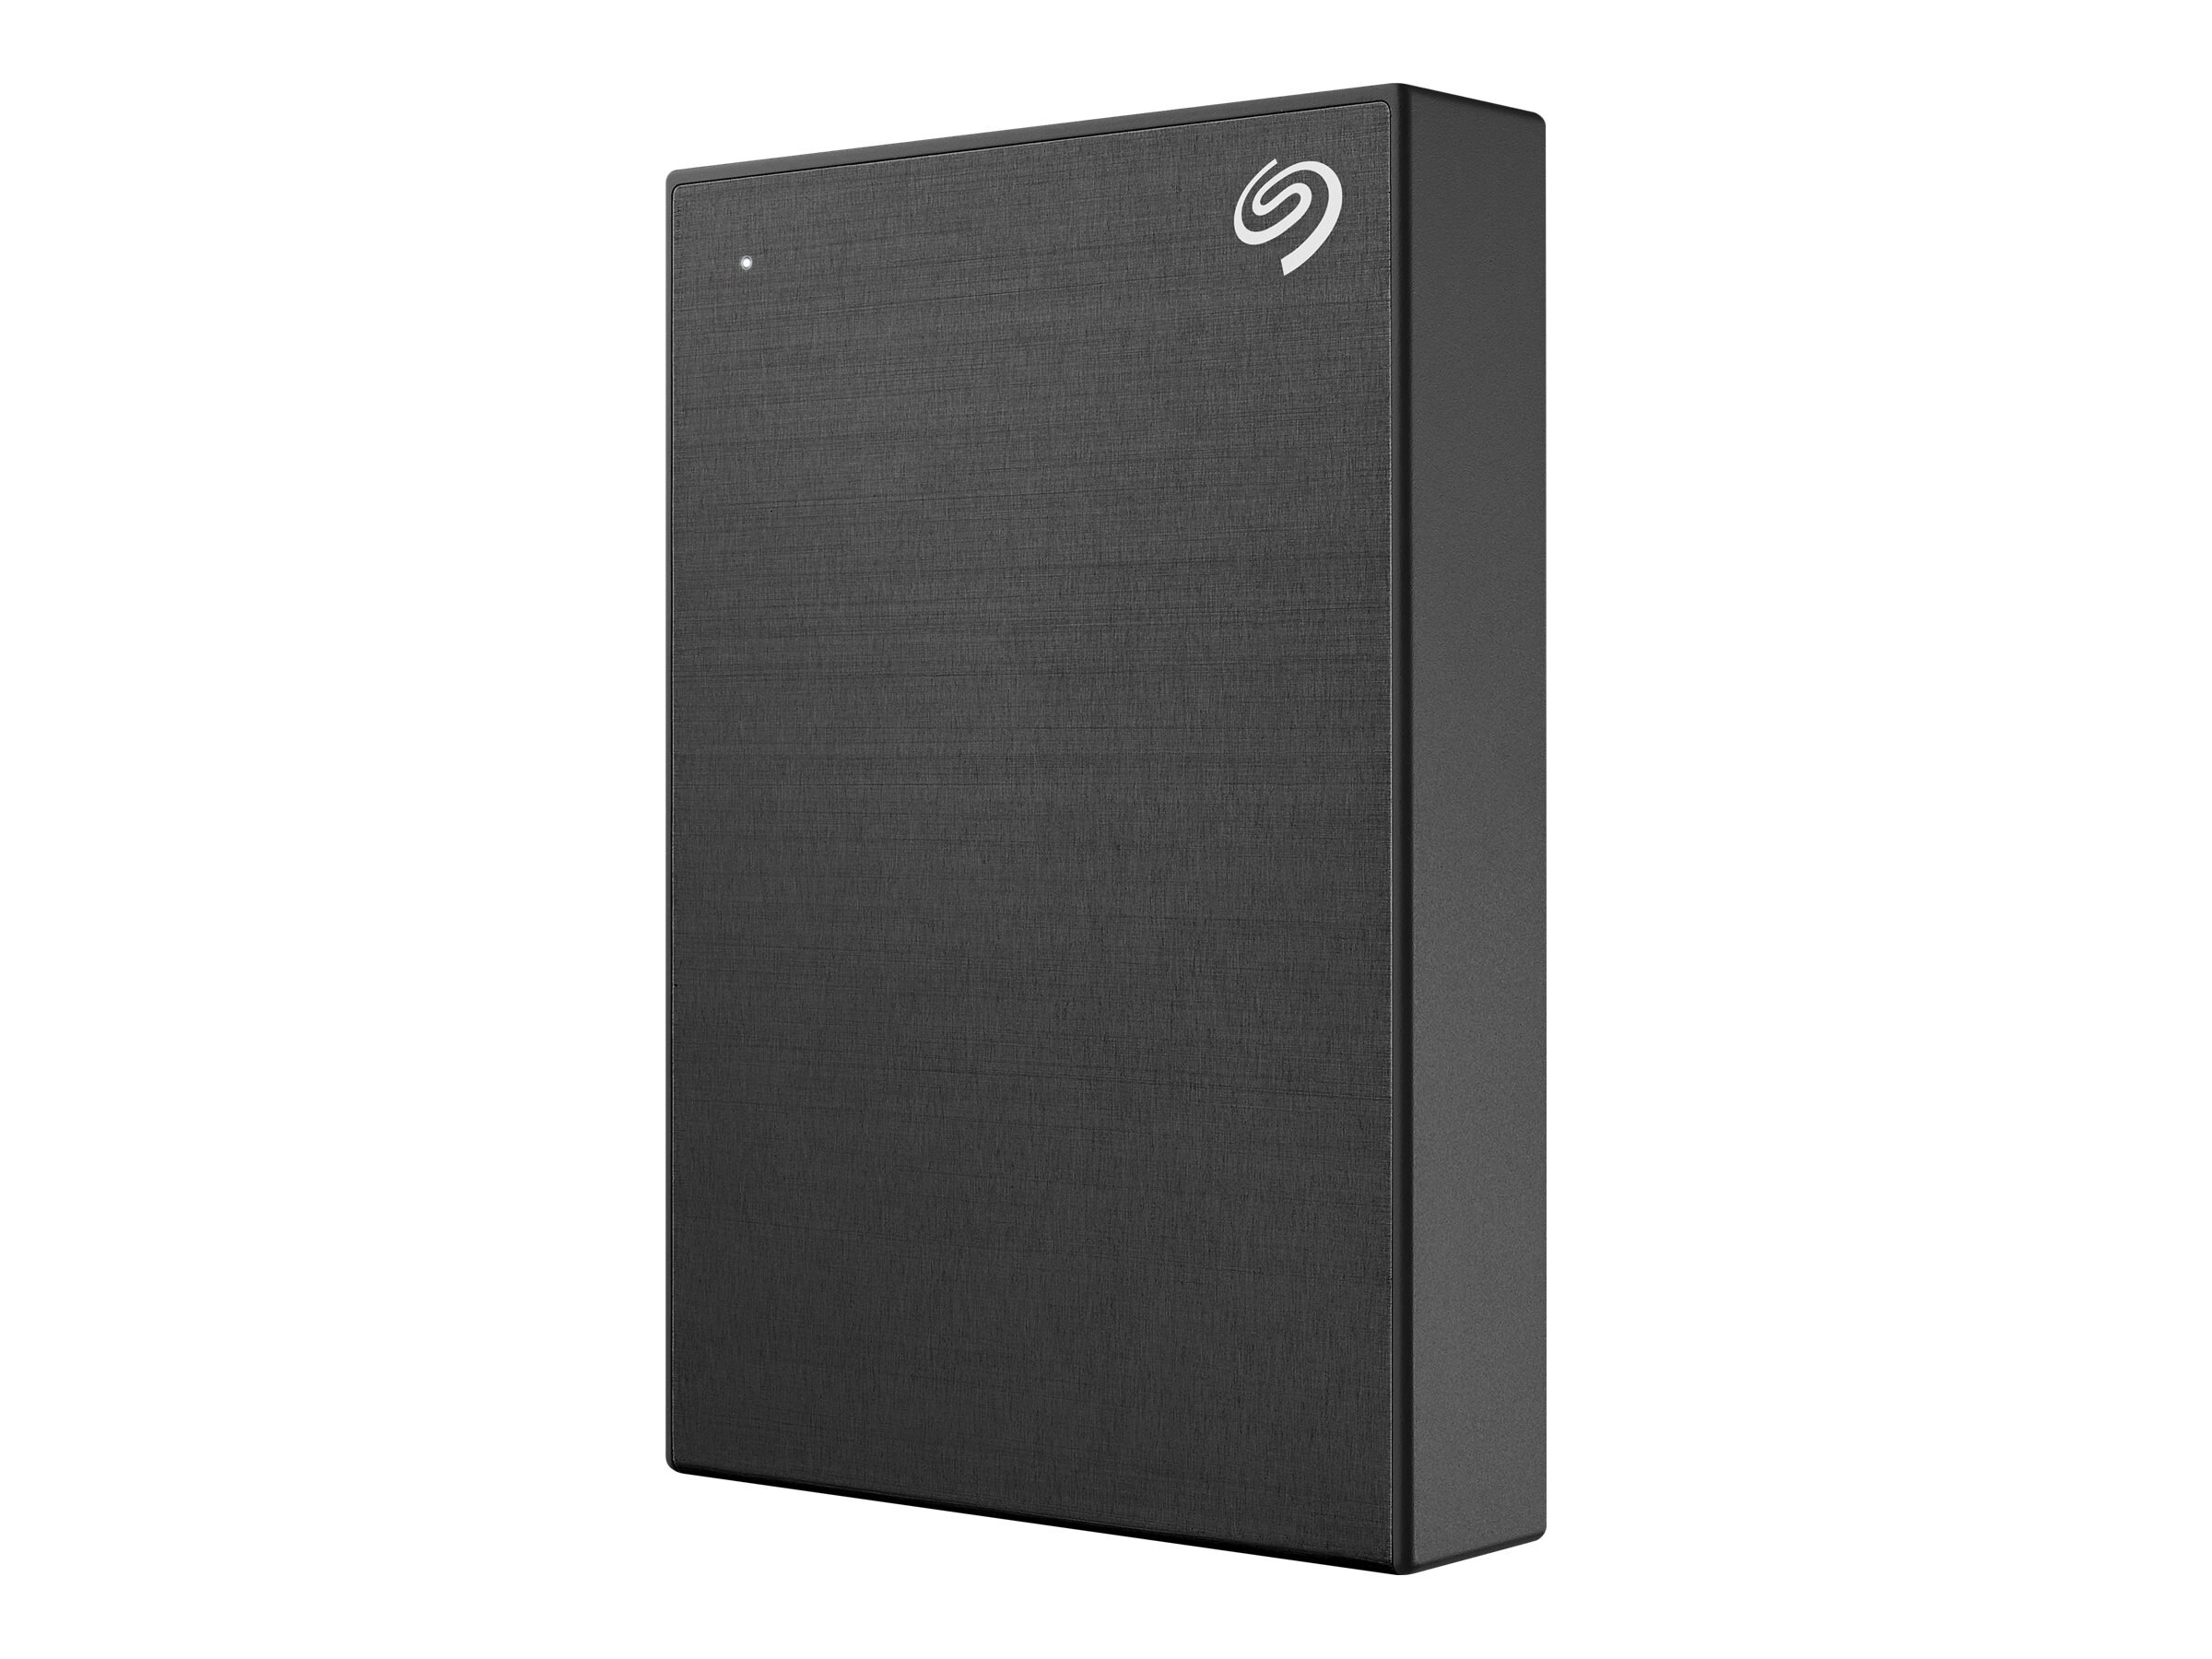 Laptop and Mac M2 2TB Black External Hard Drive,Slim External Hard Drive 1TB 2TB Portable Storage Drive Compatible with PC 